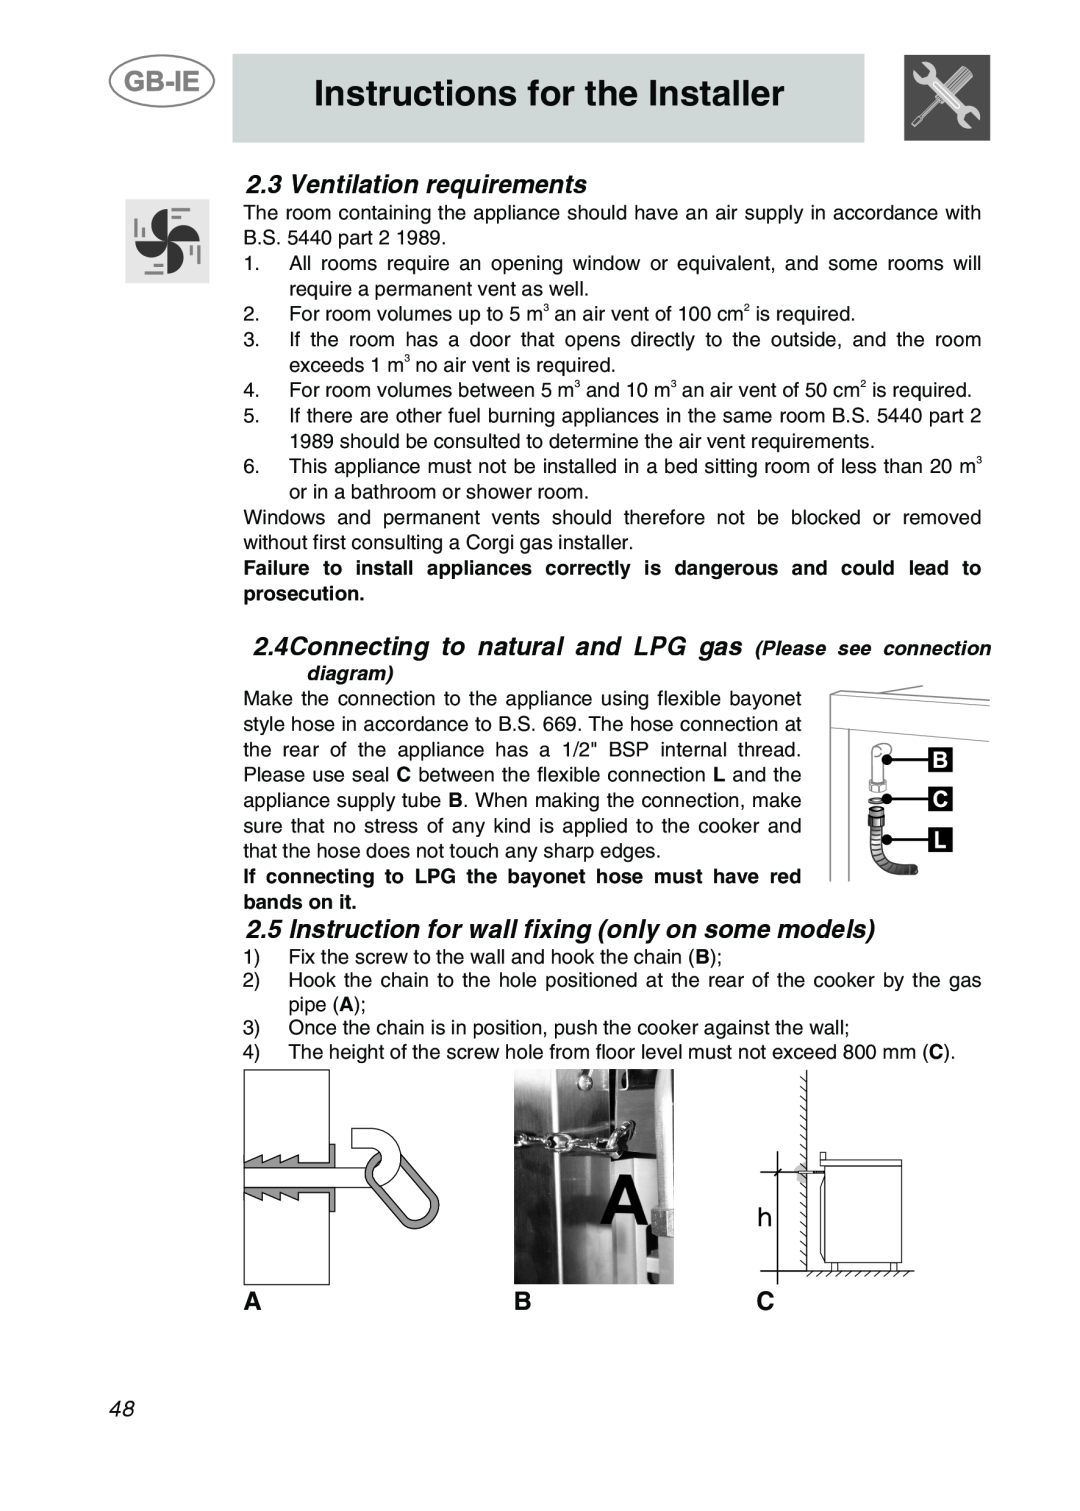 Smeg CS122-6 manual Ventilation requirements, 2.4Connecting to natural and LPG gas Please see connection, diagram 